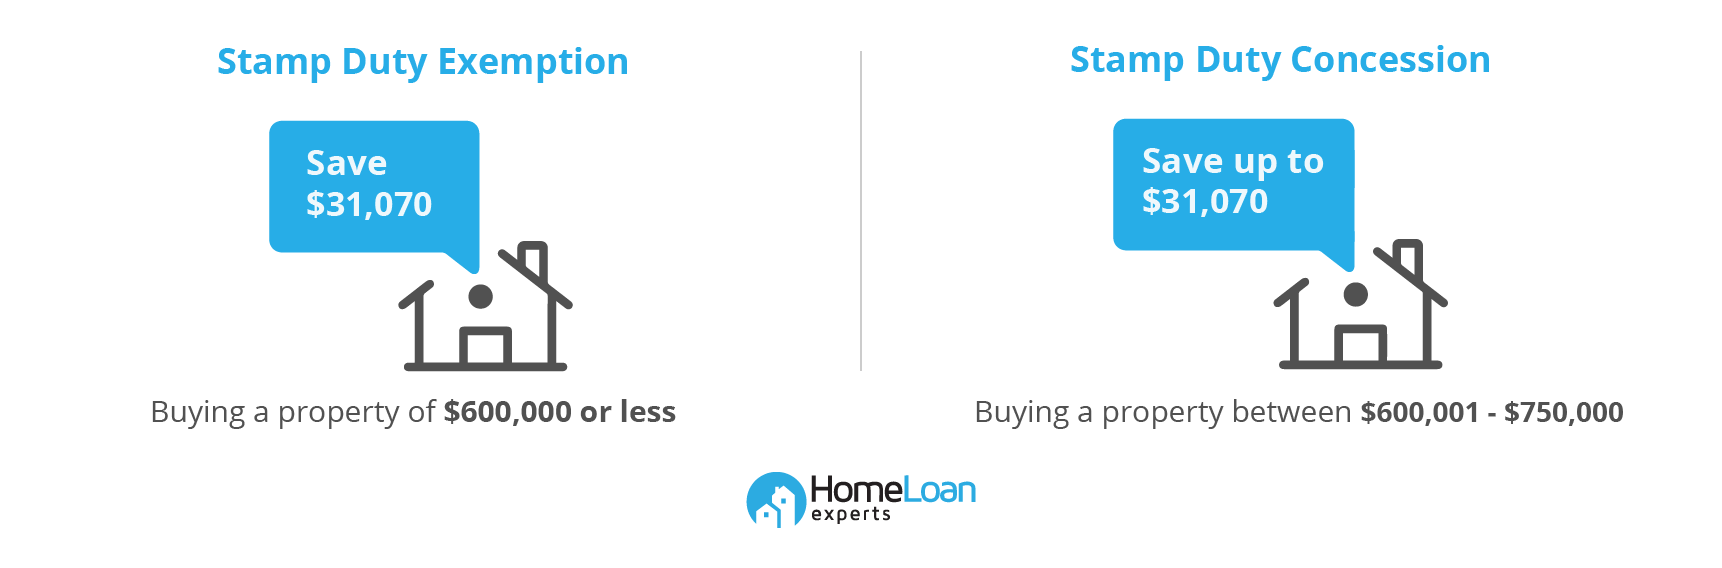 Savings from stamp duty exemption and concession for buying property up to $1 million in Vic are shown side by side